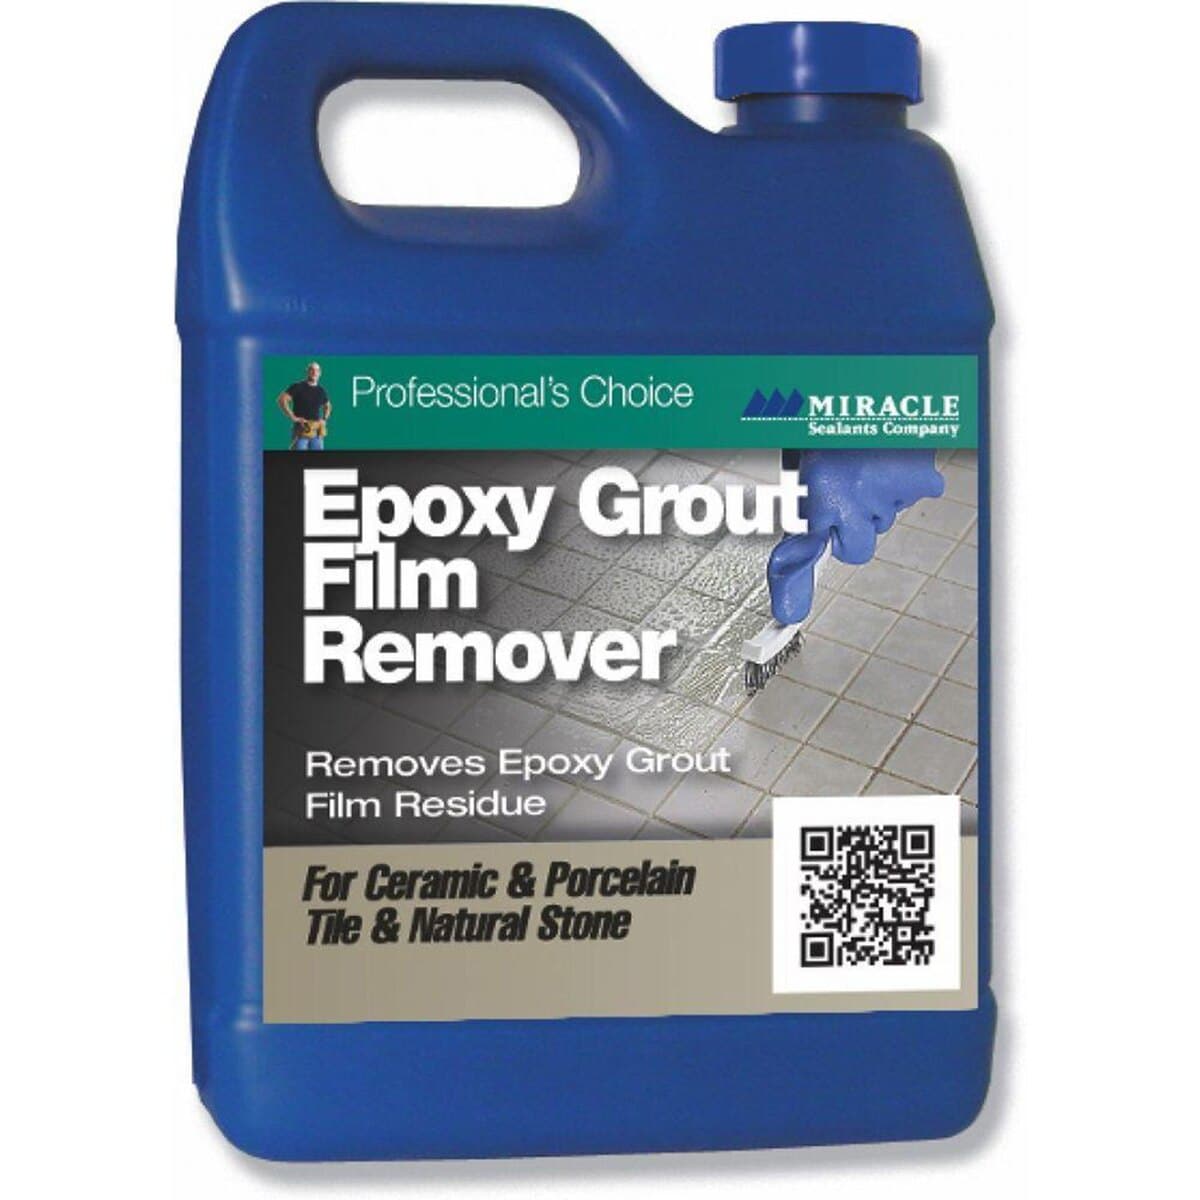 Miracle Epoxy Grout Film Remover - Case of 4 - Miracle Sealants